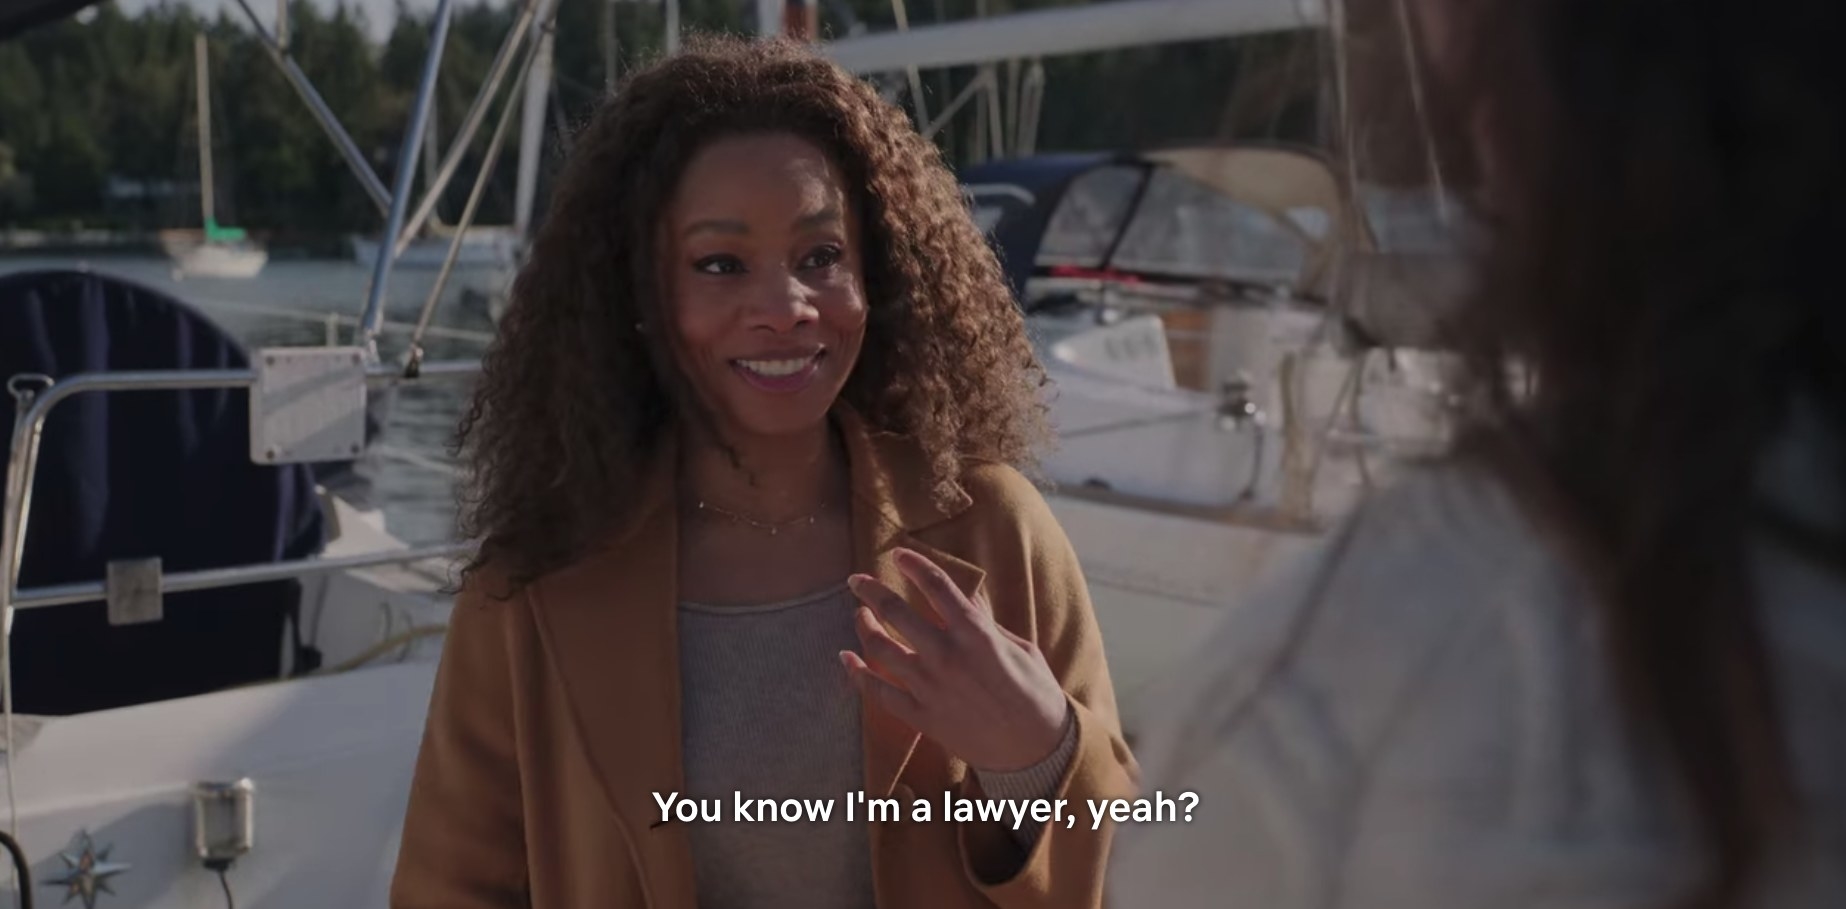 Alex&#x27;s client Regina reminds her that she is a lawyer